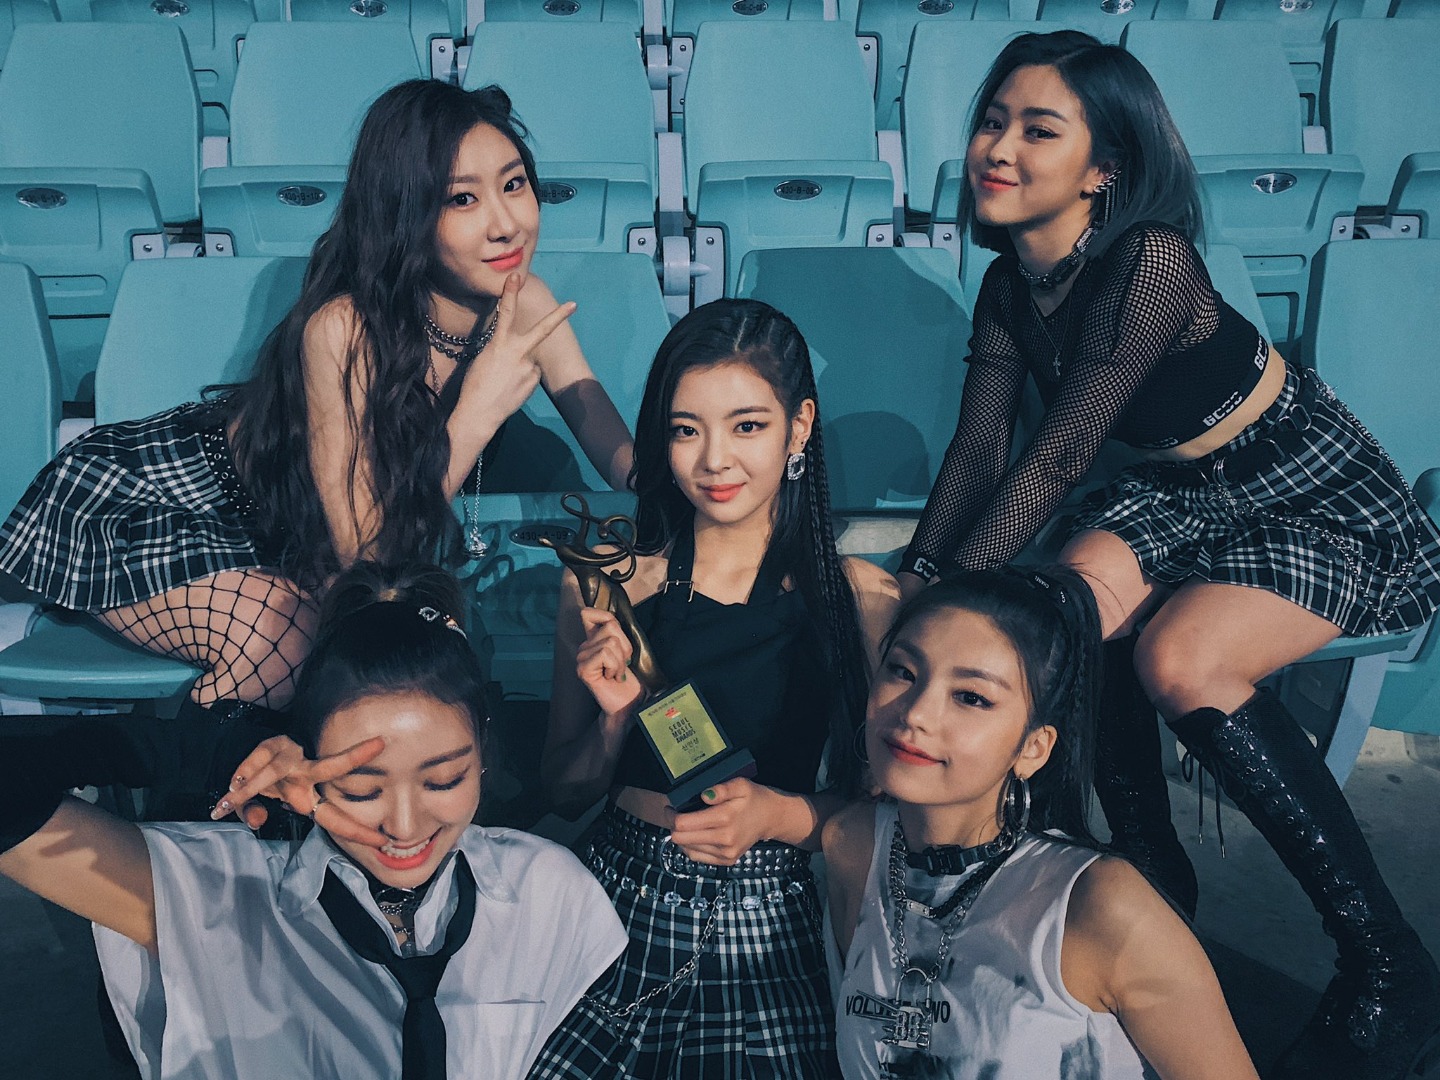 ITZY at Seoul Music Awards 2020